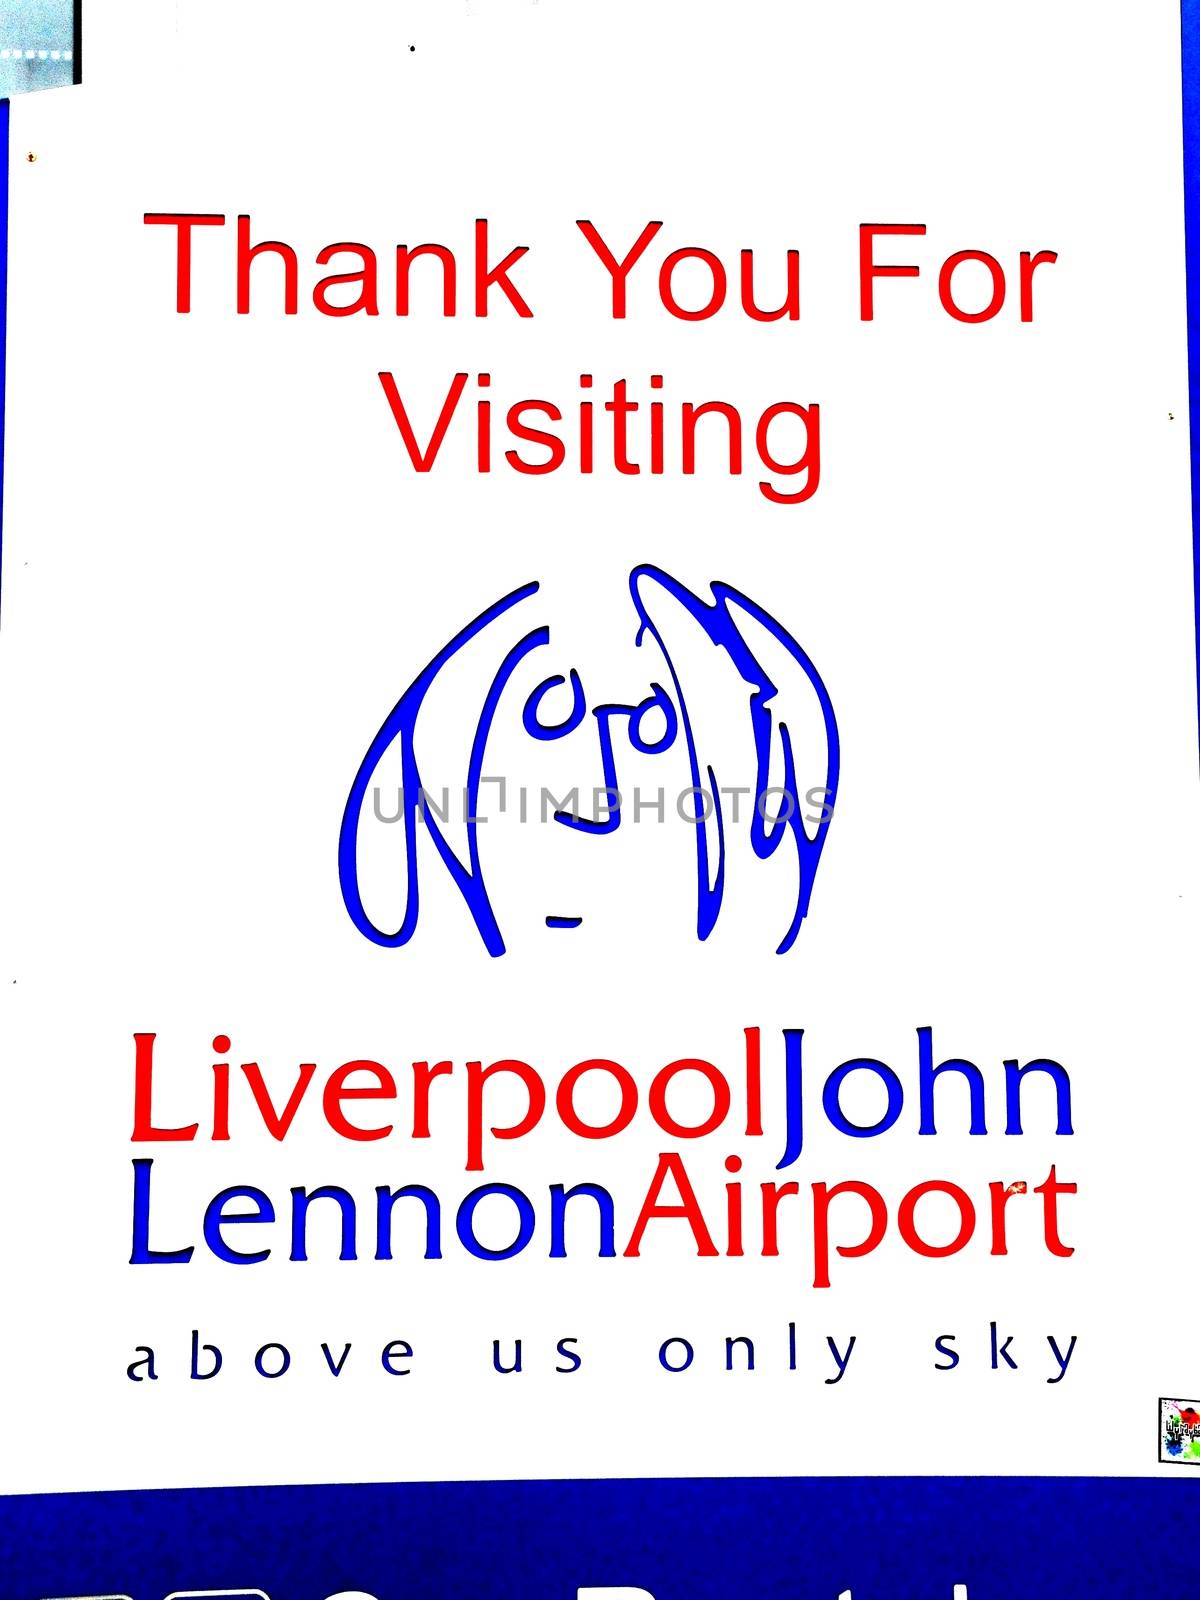 Lennon airport message by gorilla